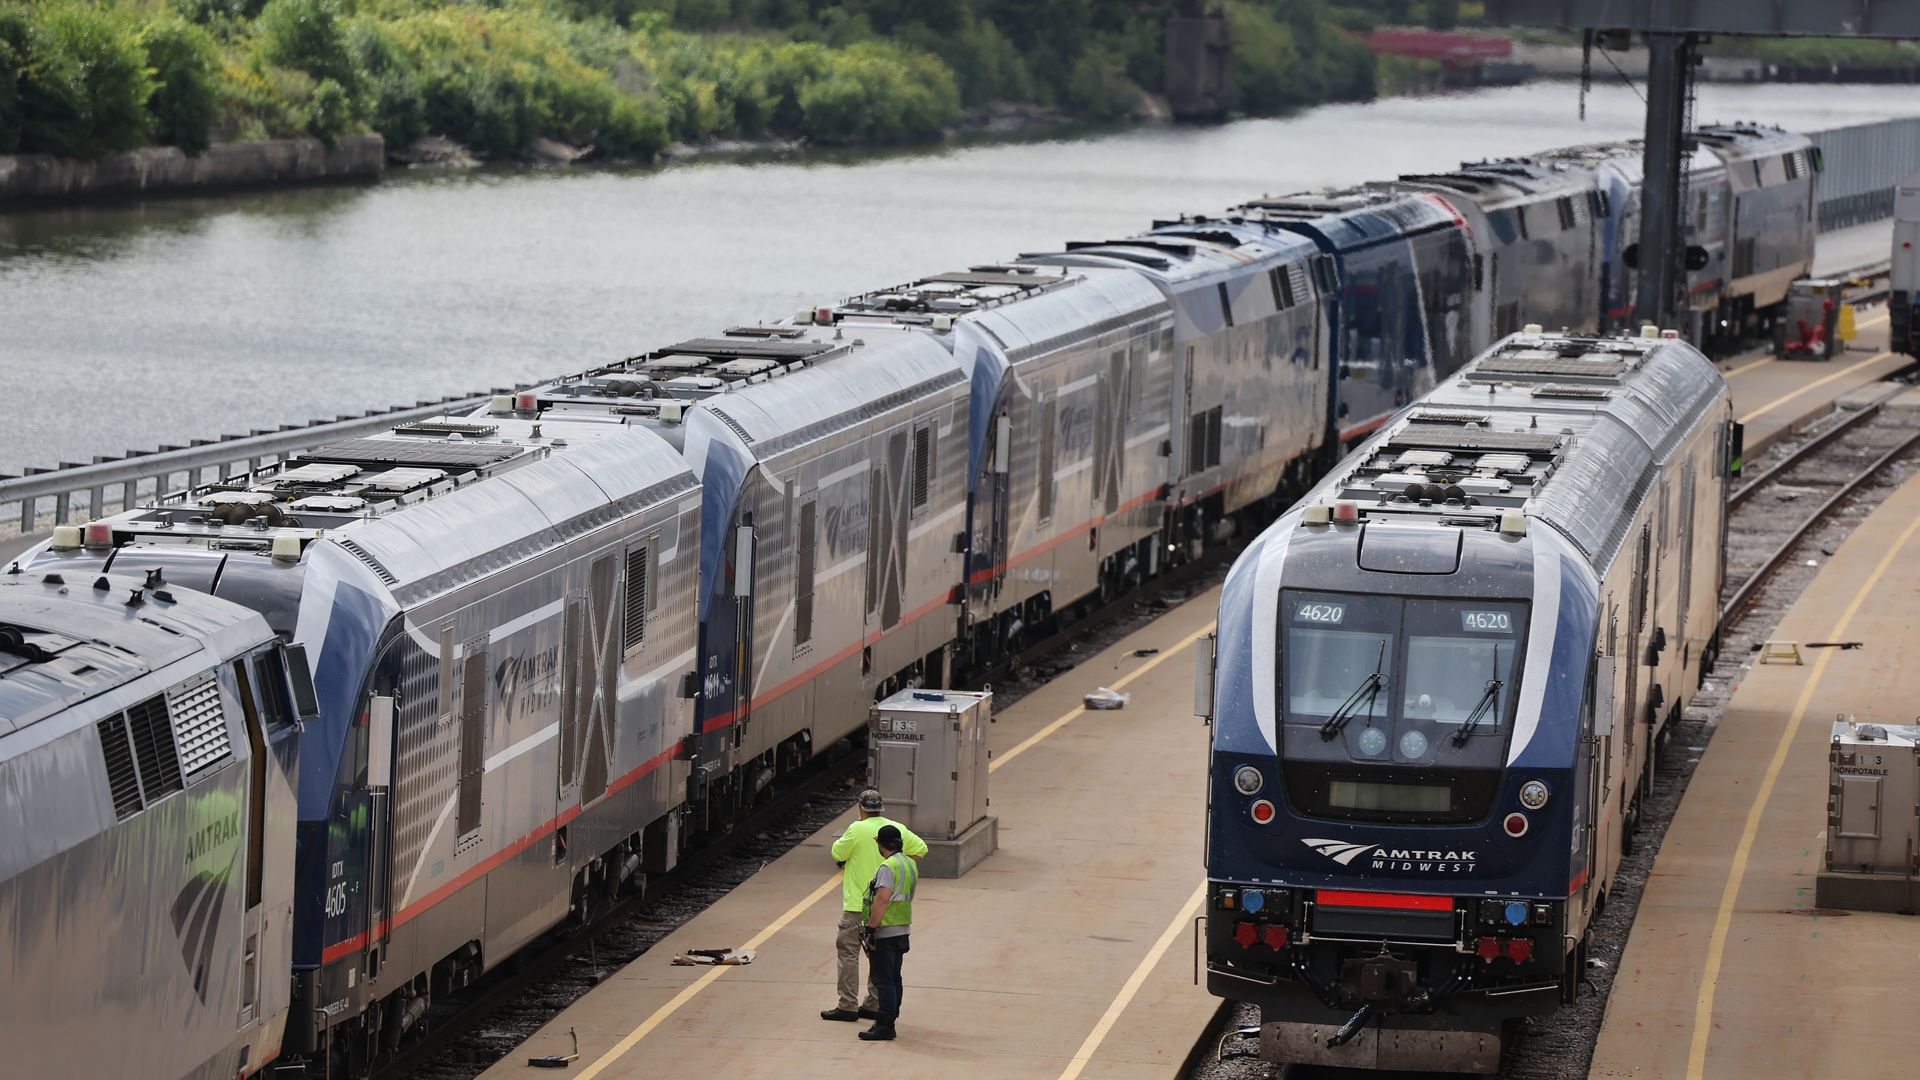 Amtrak trains at a rail in Chicago on Sept. 13.